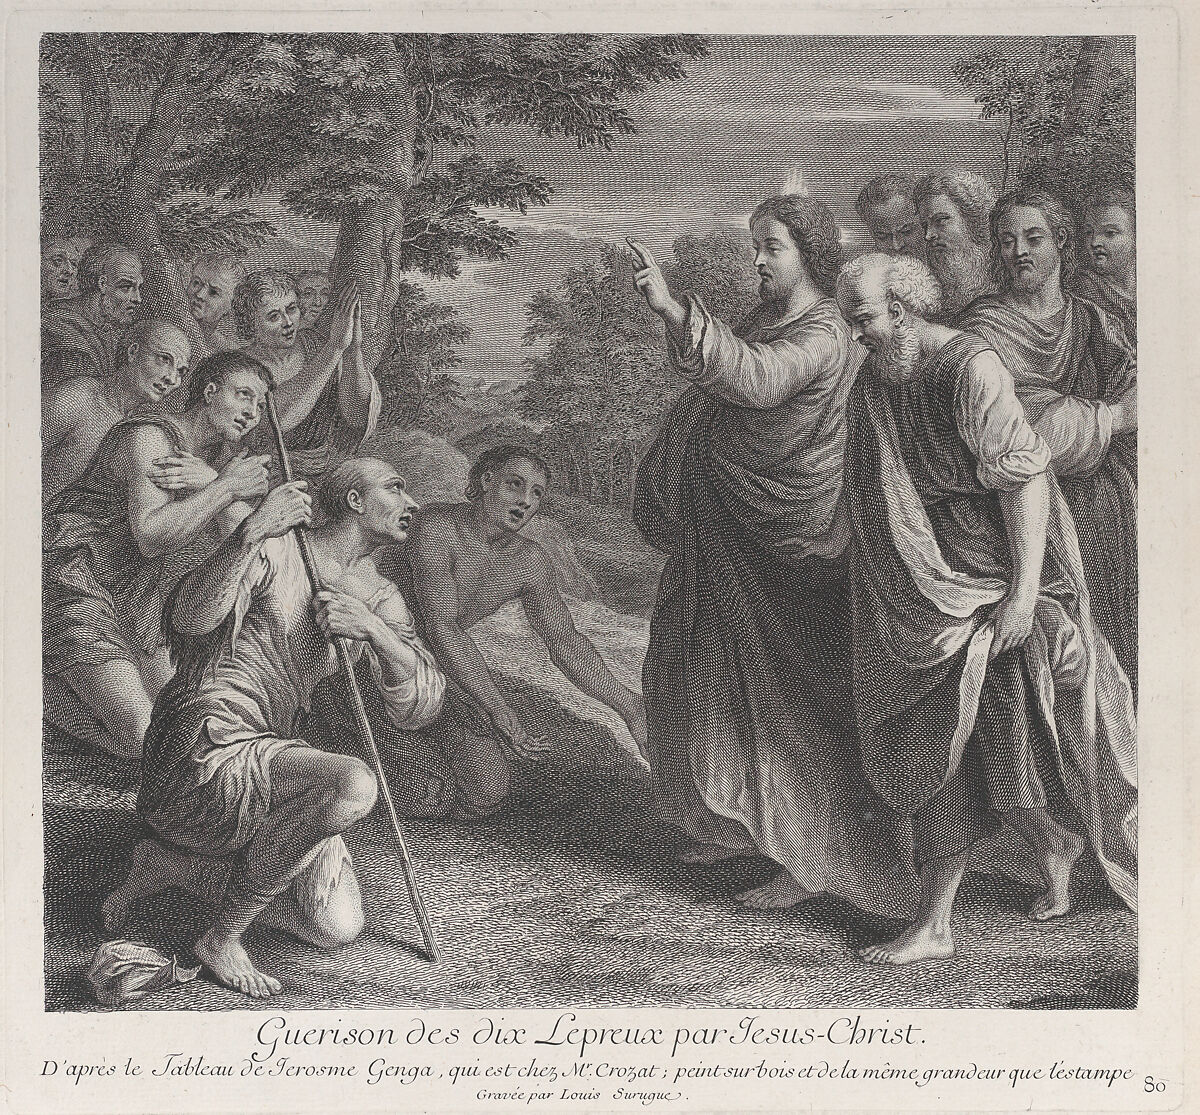 Healing of the ten lepers by Christ, who stands at right, Louis Surugue (French, Paris ca. 1686–1762 Grand Vaux), Etching and engraving 